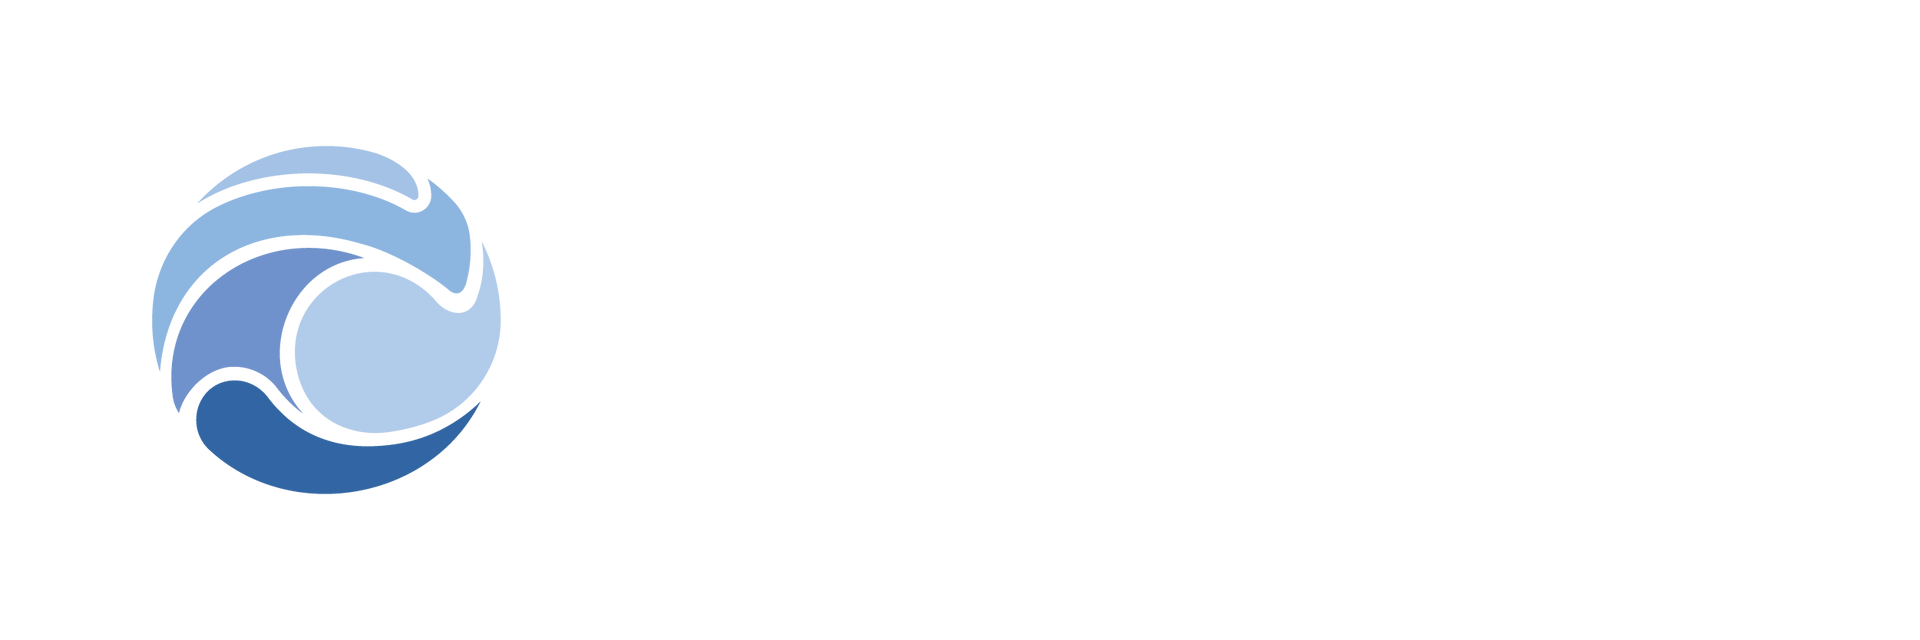 Centre for Psychology and Emotional Health | Therapy in GTA